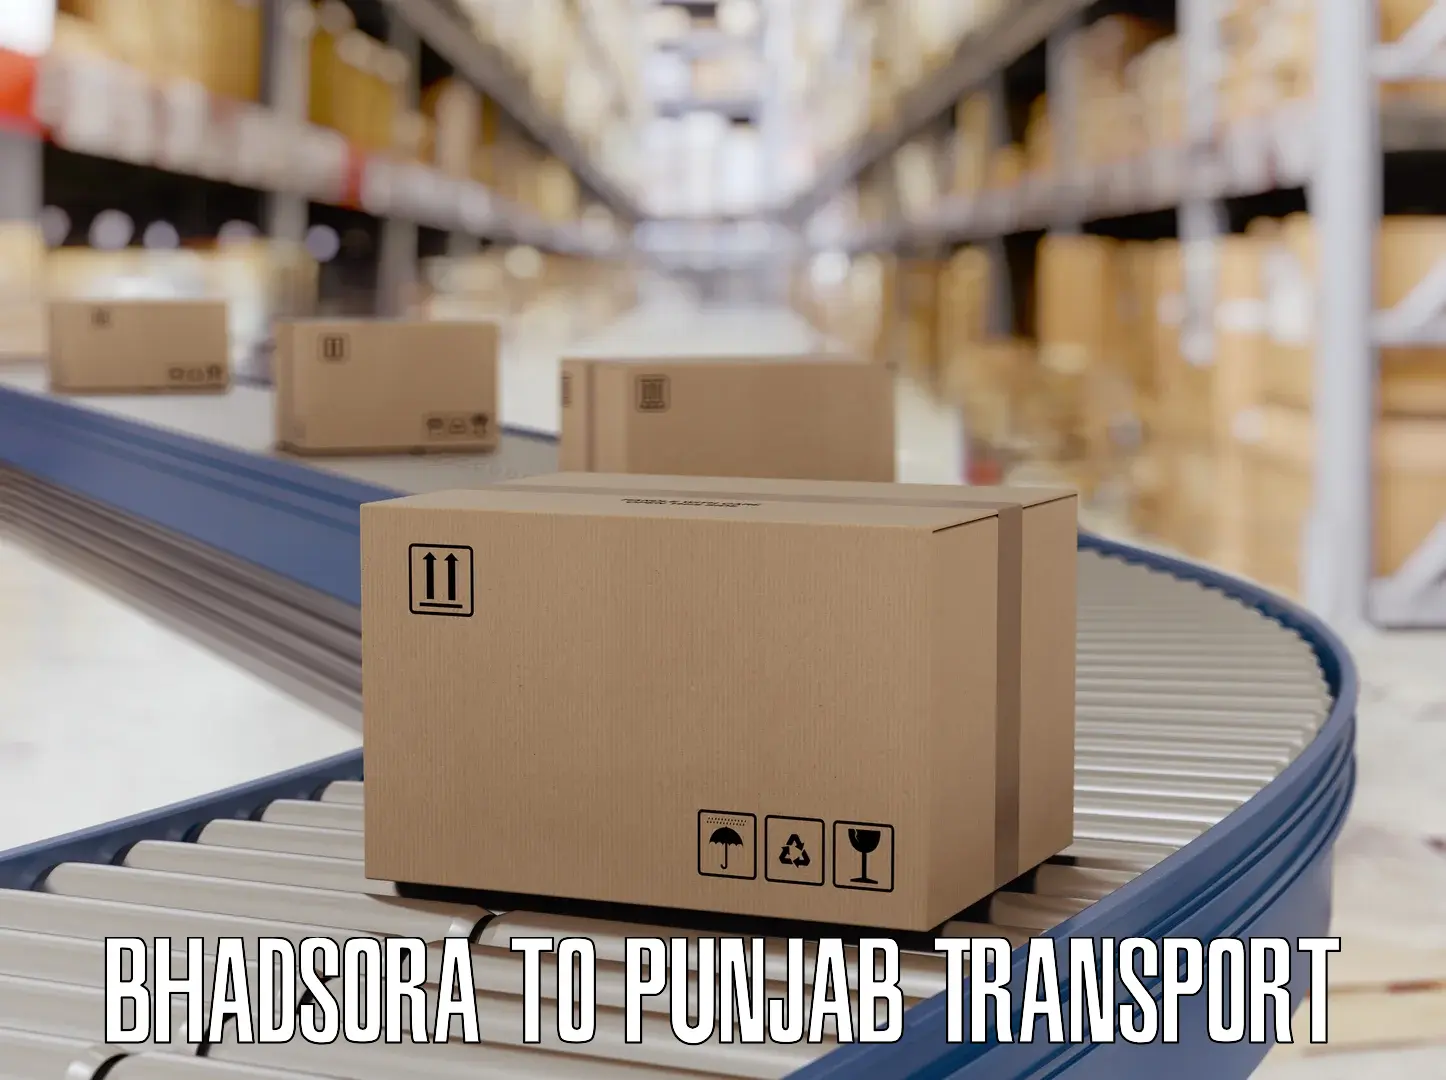 Nationwide transport services Bhadsora to Punjab